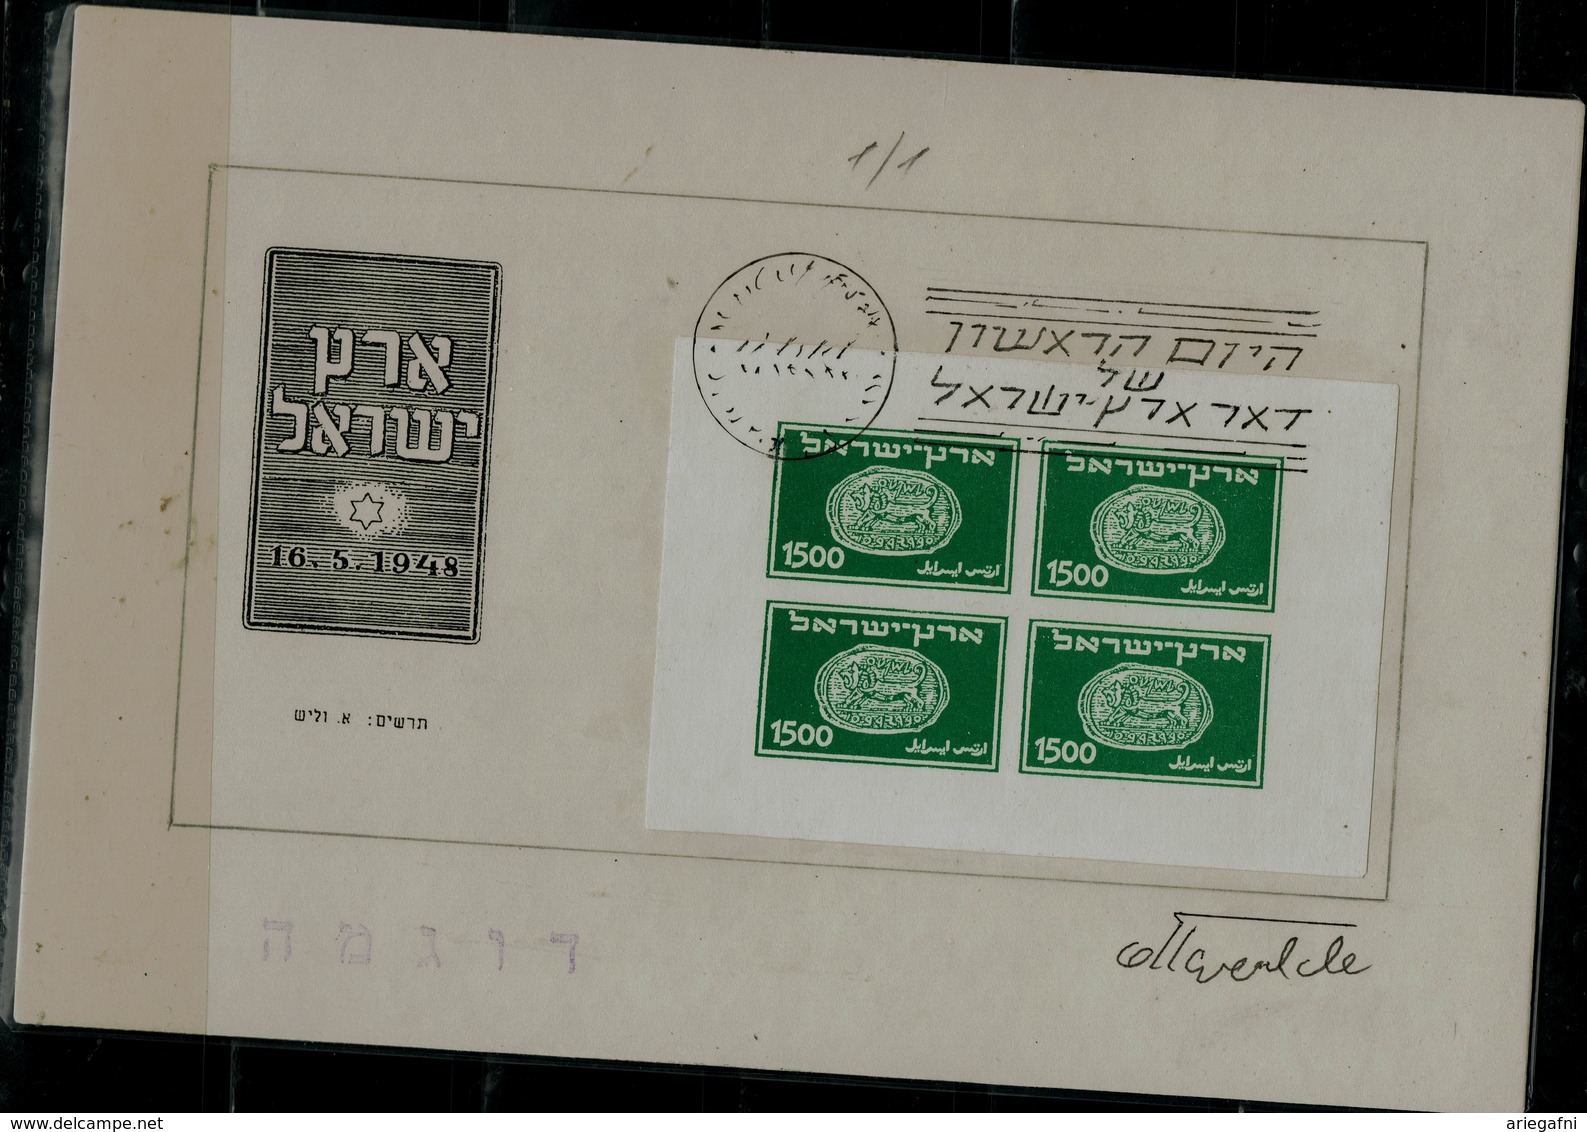 ISRAEL  1948 PROOF OF FDC EREZ ISRAEL OF BLOCK OF 4 DOAR IVRI SIGNET BY ARTIST VALISH VF!! - Imperforates, Proofs & Errors